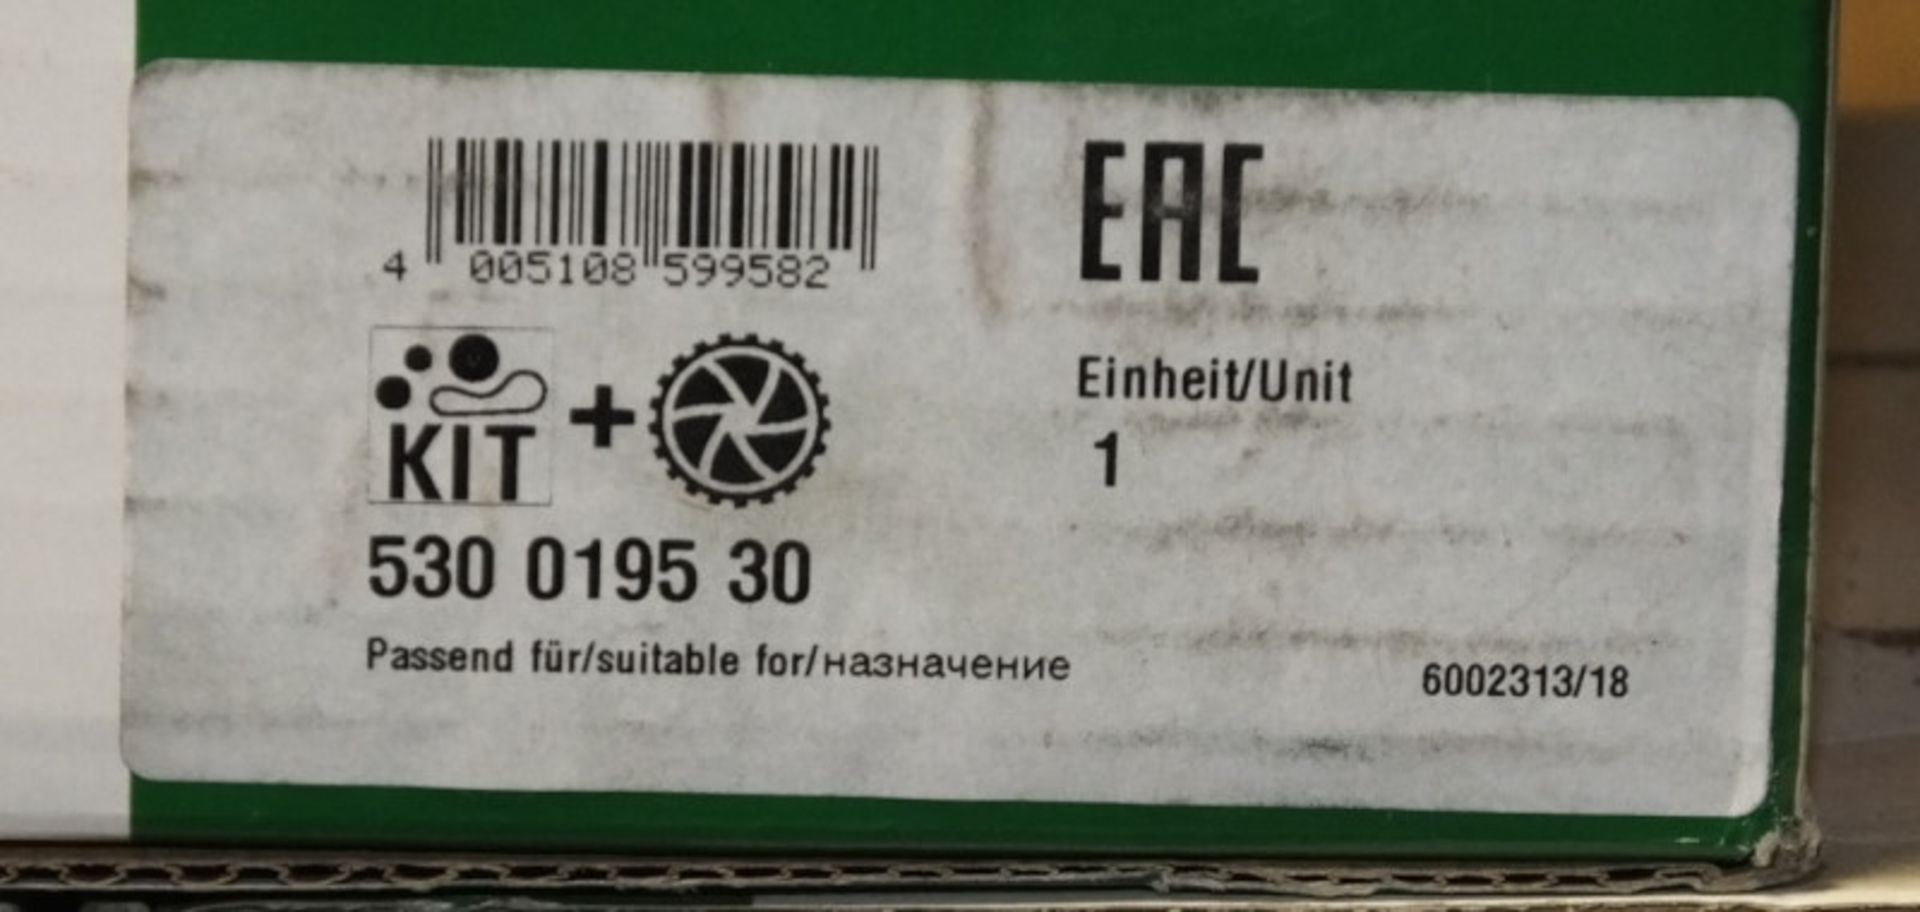 5x INA Schaeffler Timing Belt Kits - Please see pictures for model numbers - Image 2 of 6